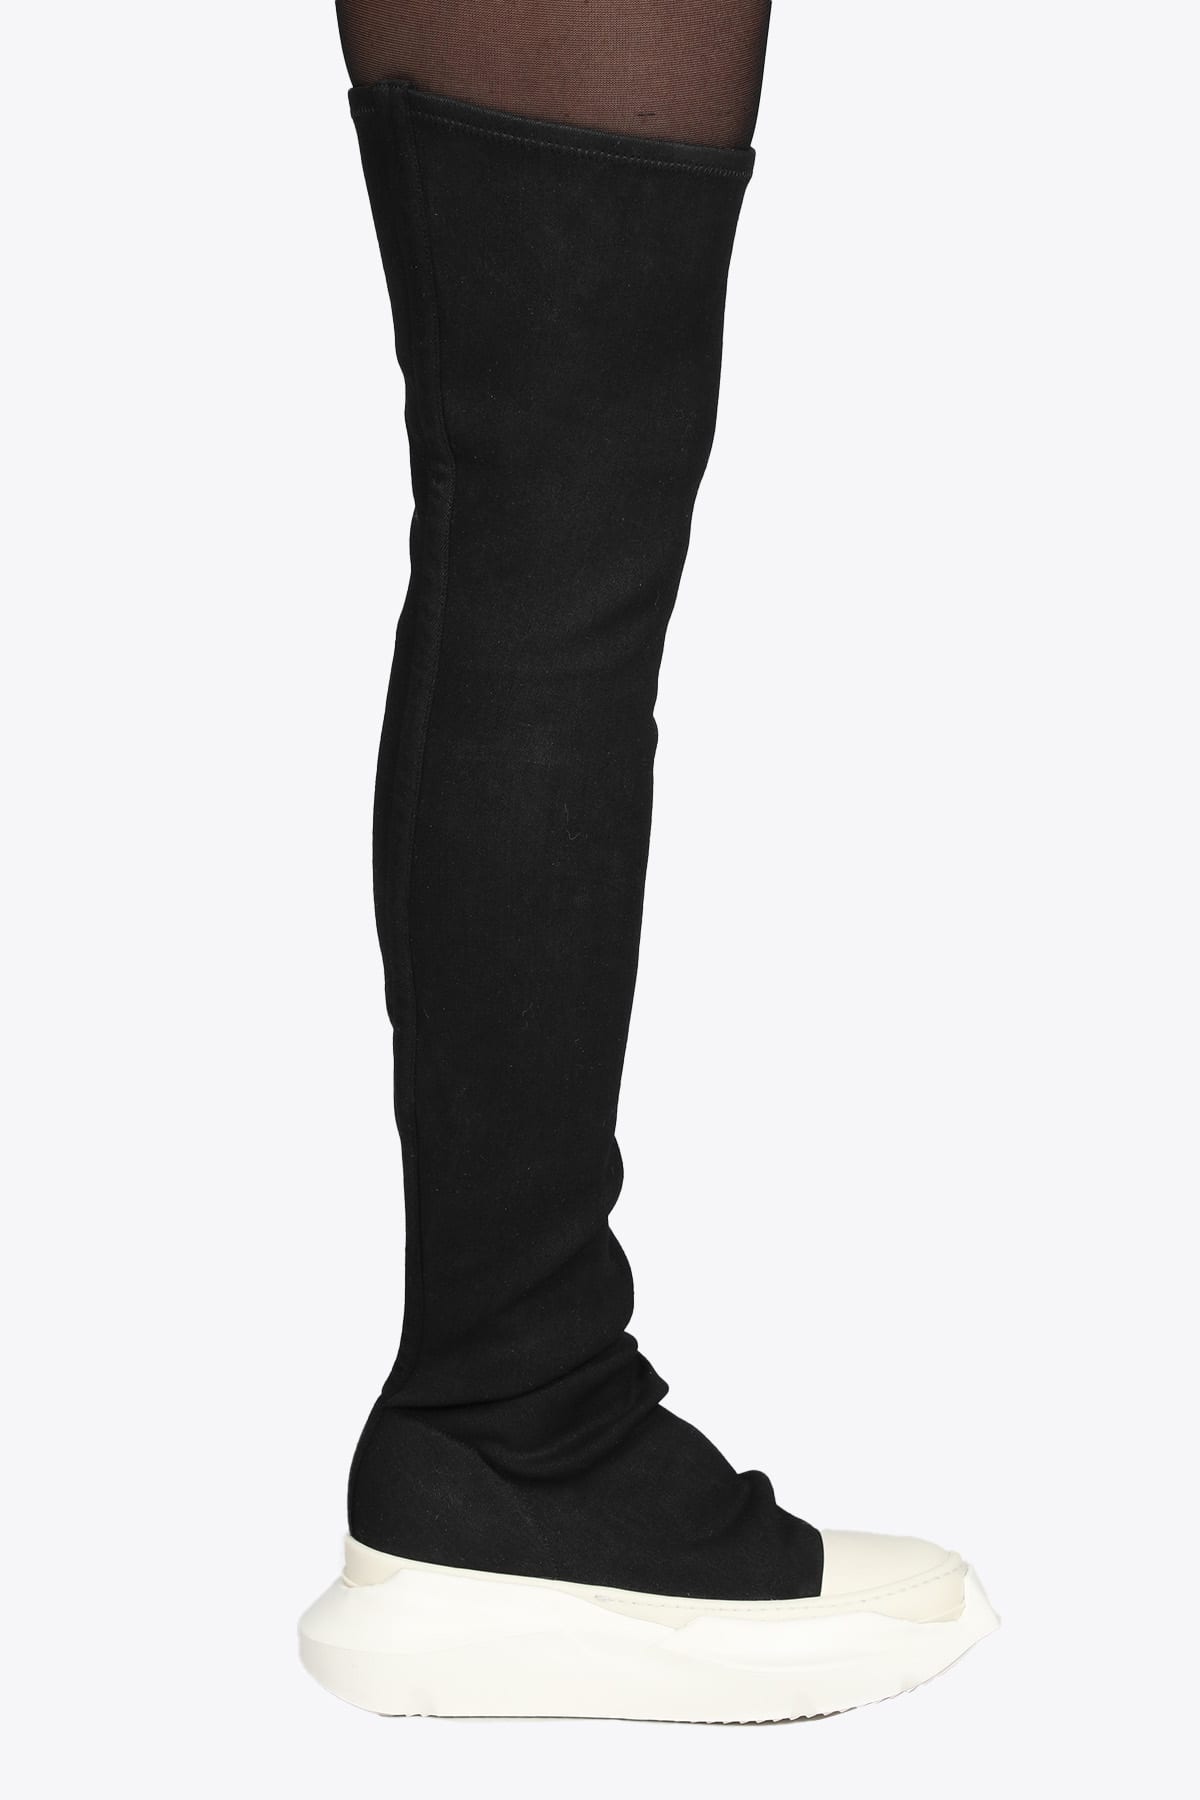 DRKSHDW Stivali Denim Abstract Black stretch canvas abstract thigh high boots